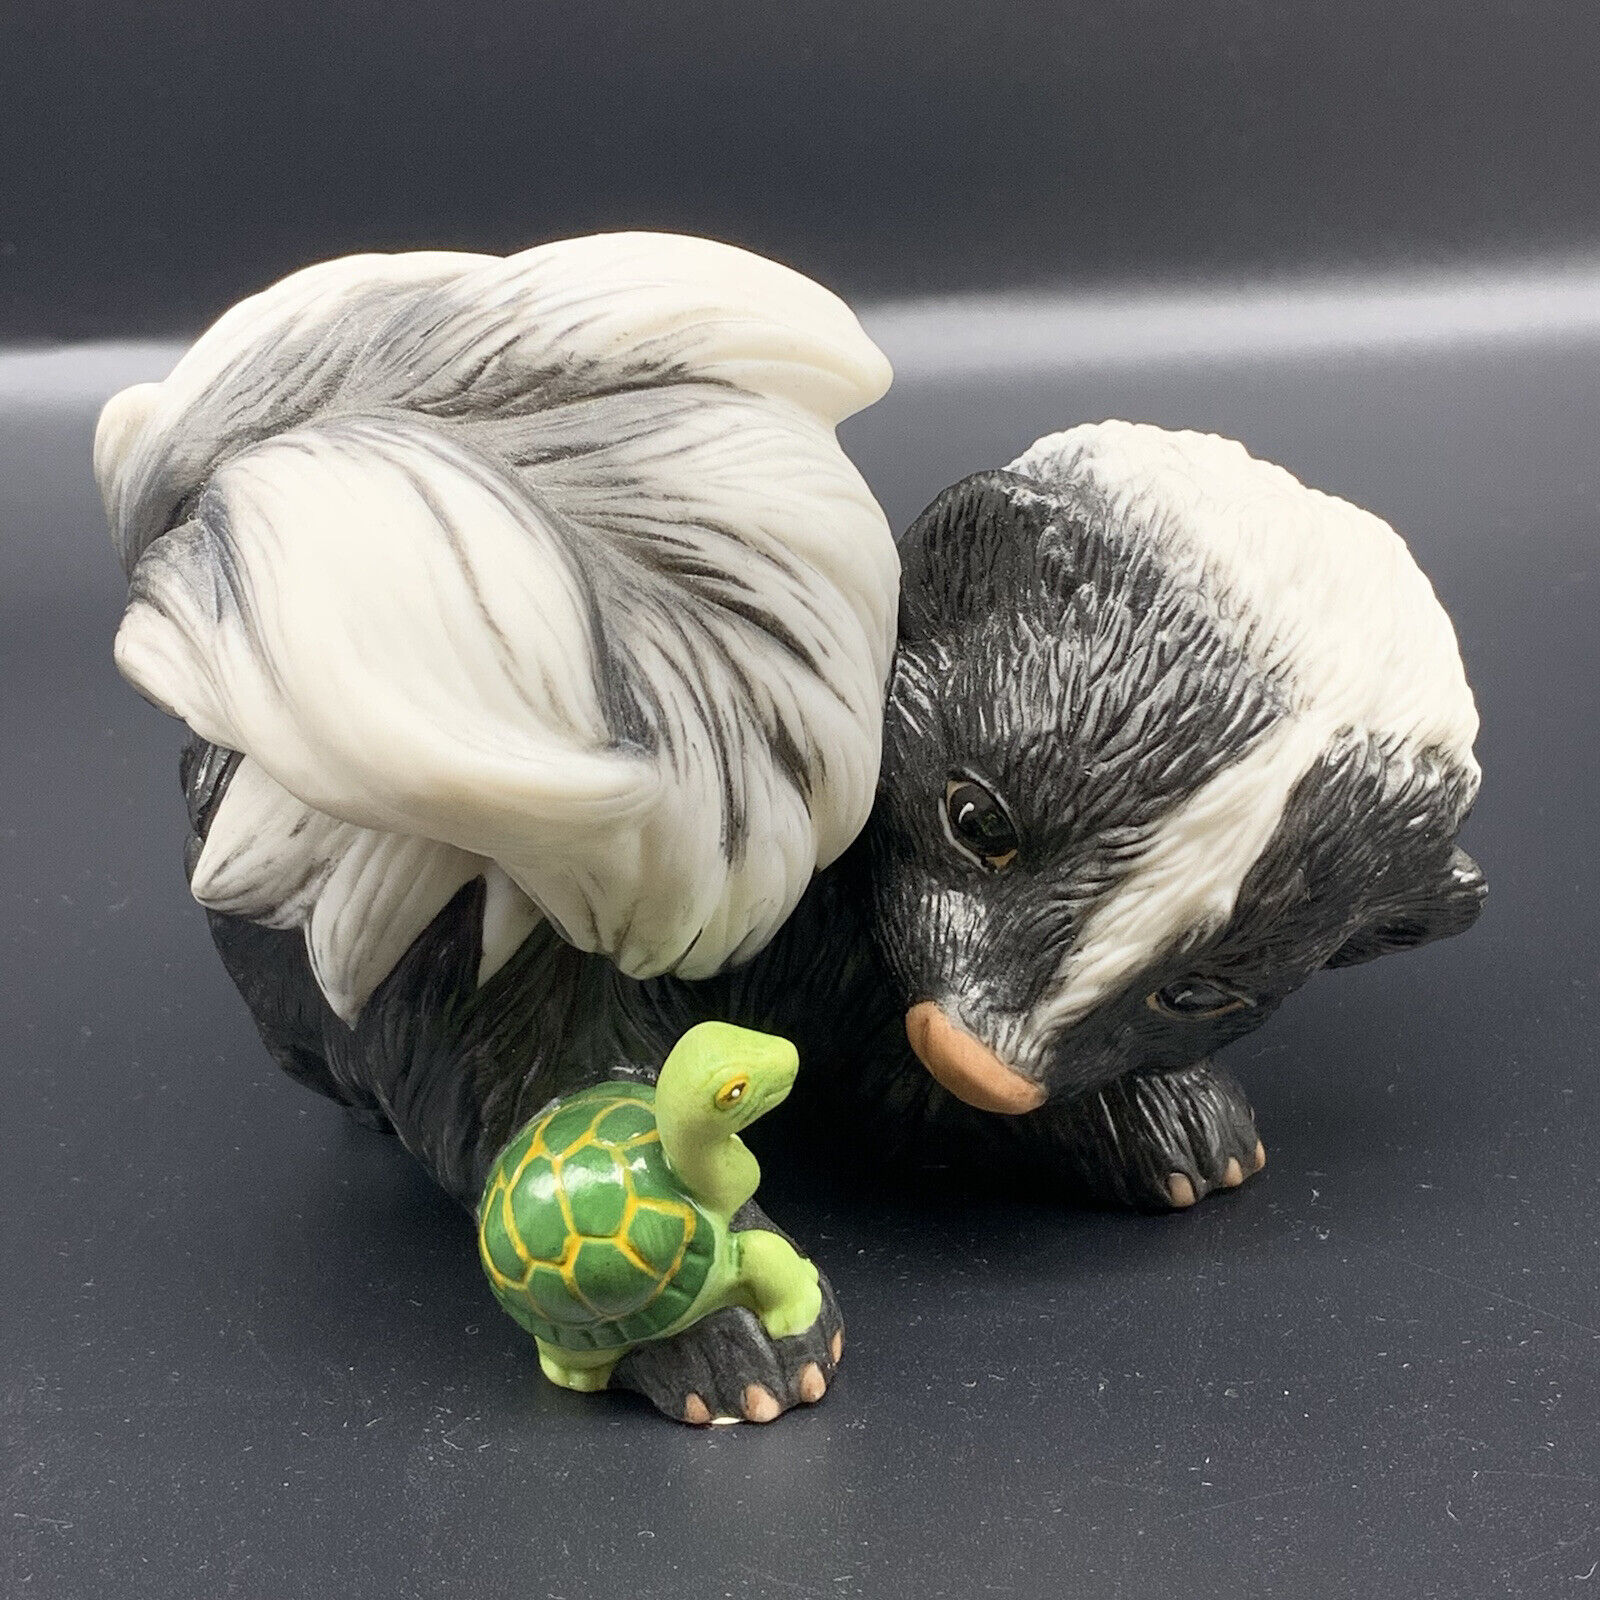 FRANKLIN MINT CURIOSITY YOUNG SKUNK WITH TORTOISE 3”